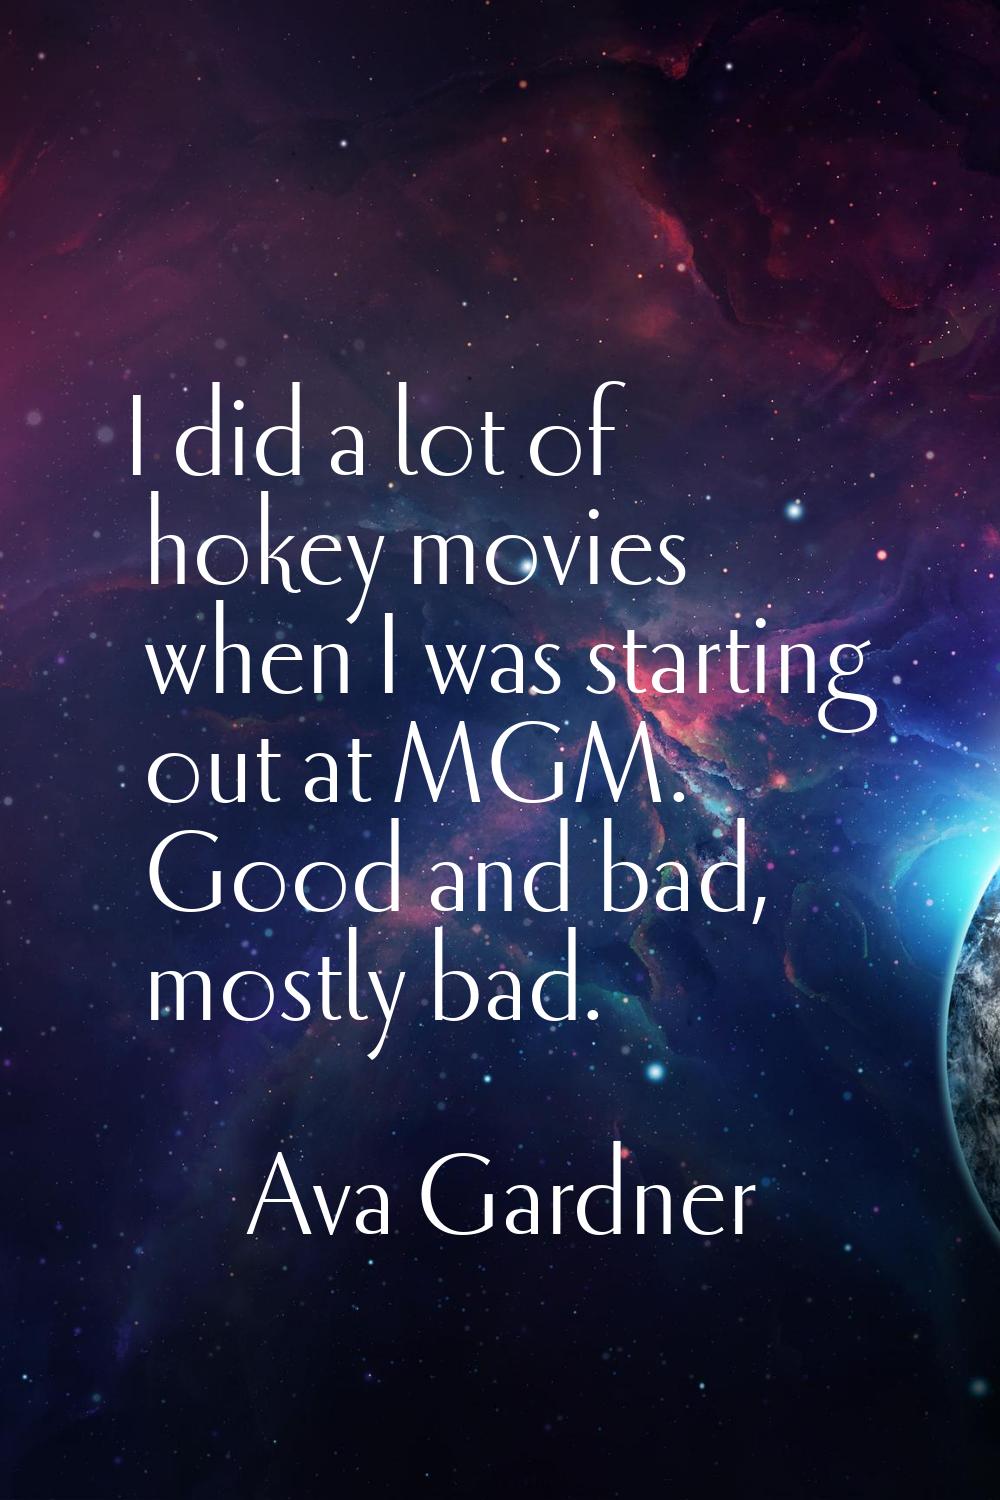 I did a lot of hokey movies when I was starting out at MGM. Good and bad, mostly bad.